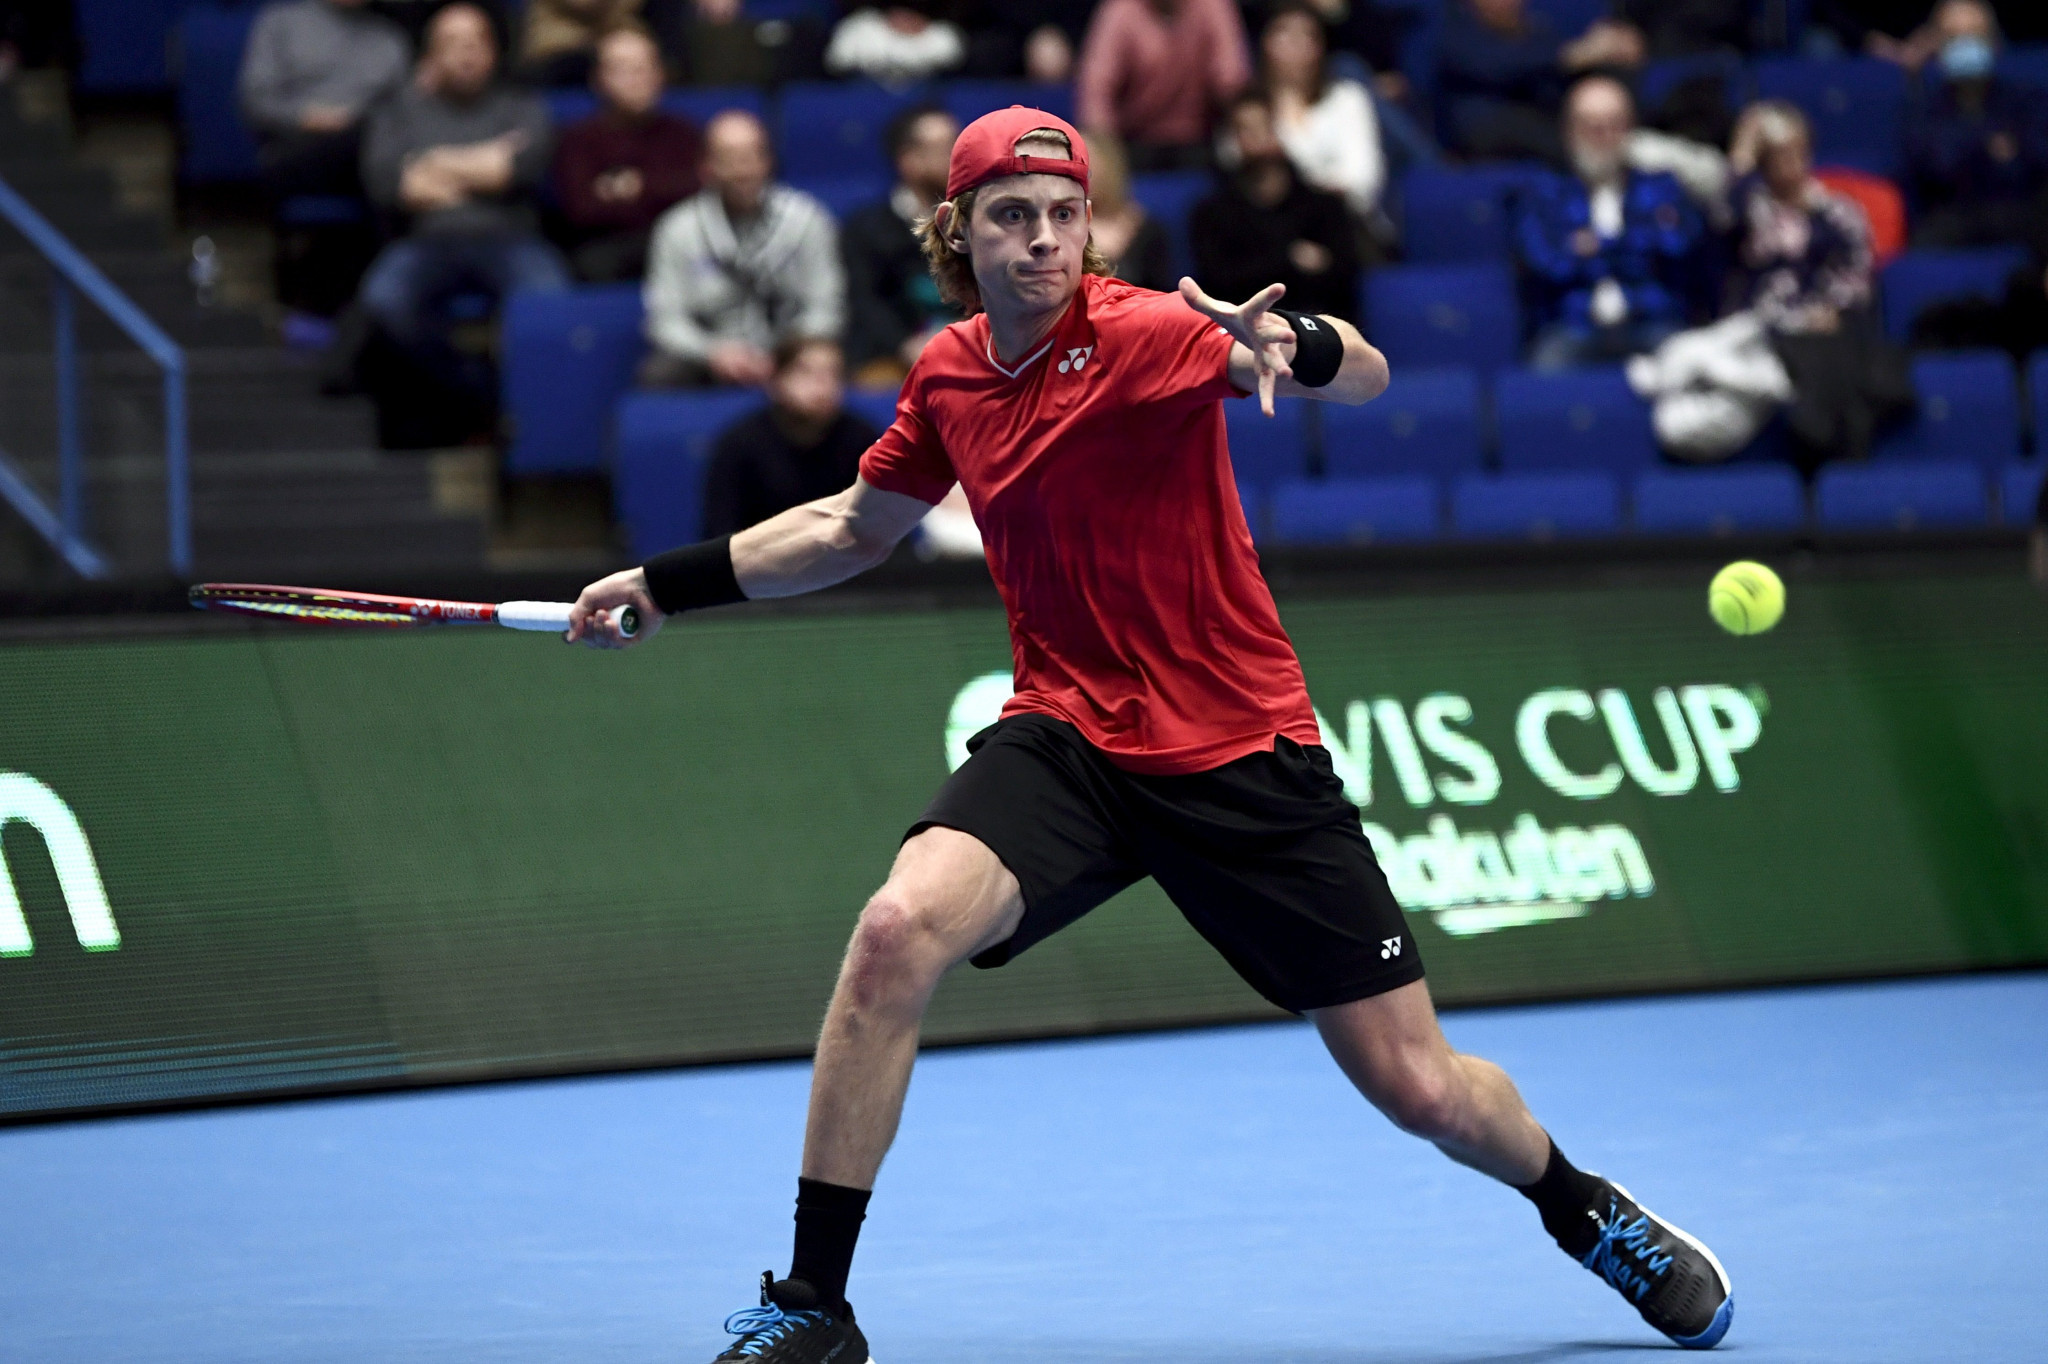 Zverev victorious on Davis Cup return while Belgium and Italy narrowly avoid upsets